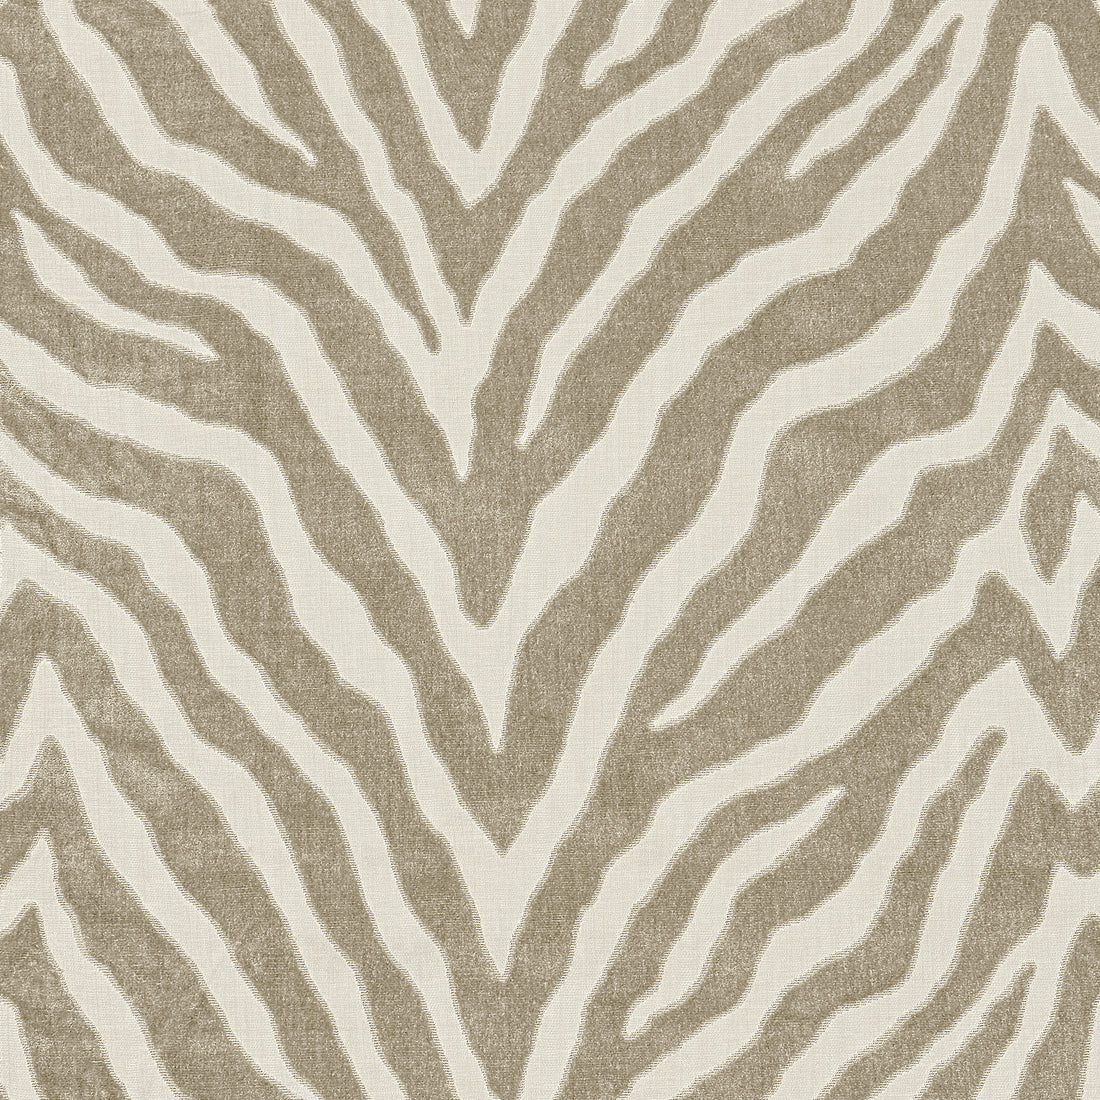 Etosha Velvet fabric in sand color - pattern number W80406 - by Thibaut in the Woven Resource Vol 10 Menagerie collection